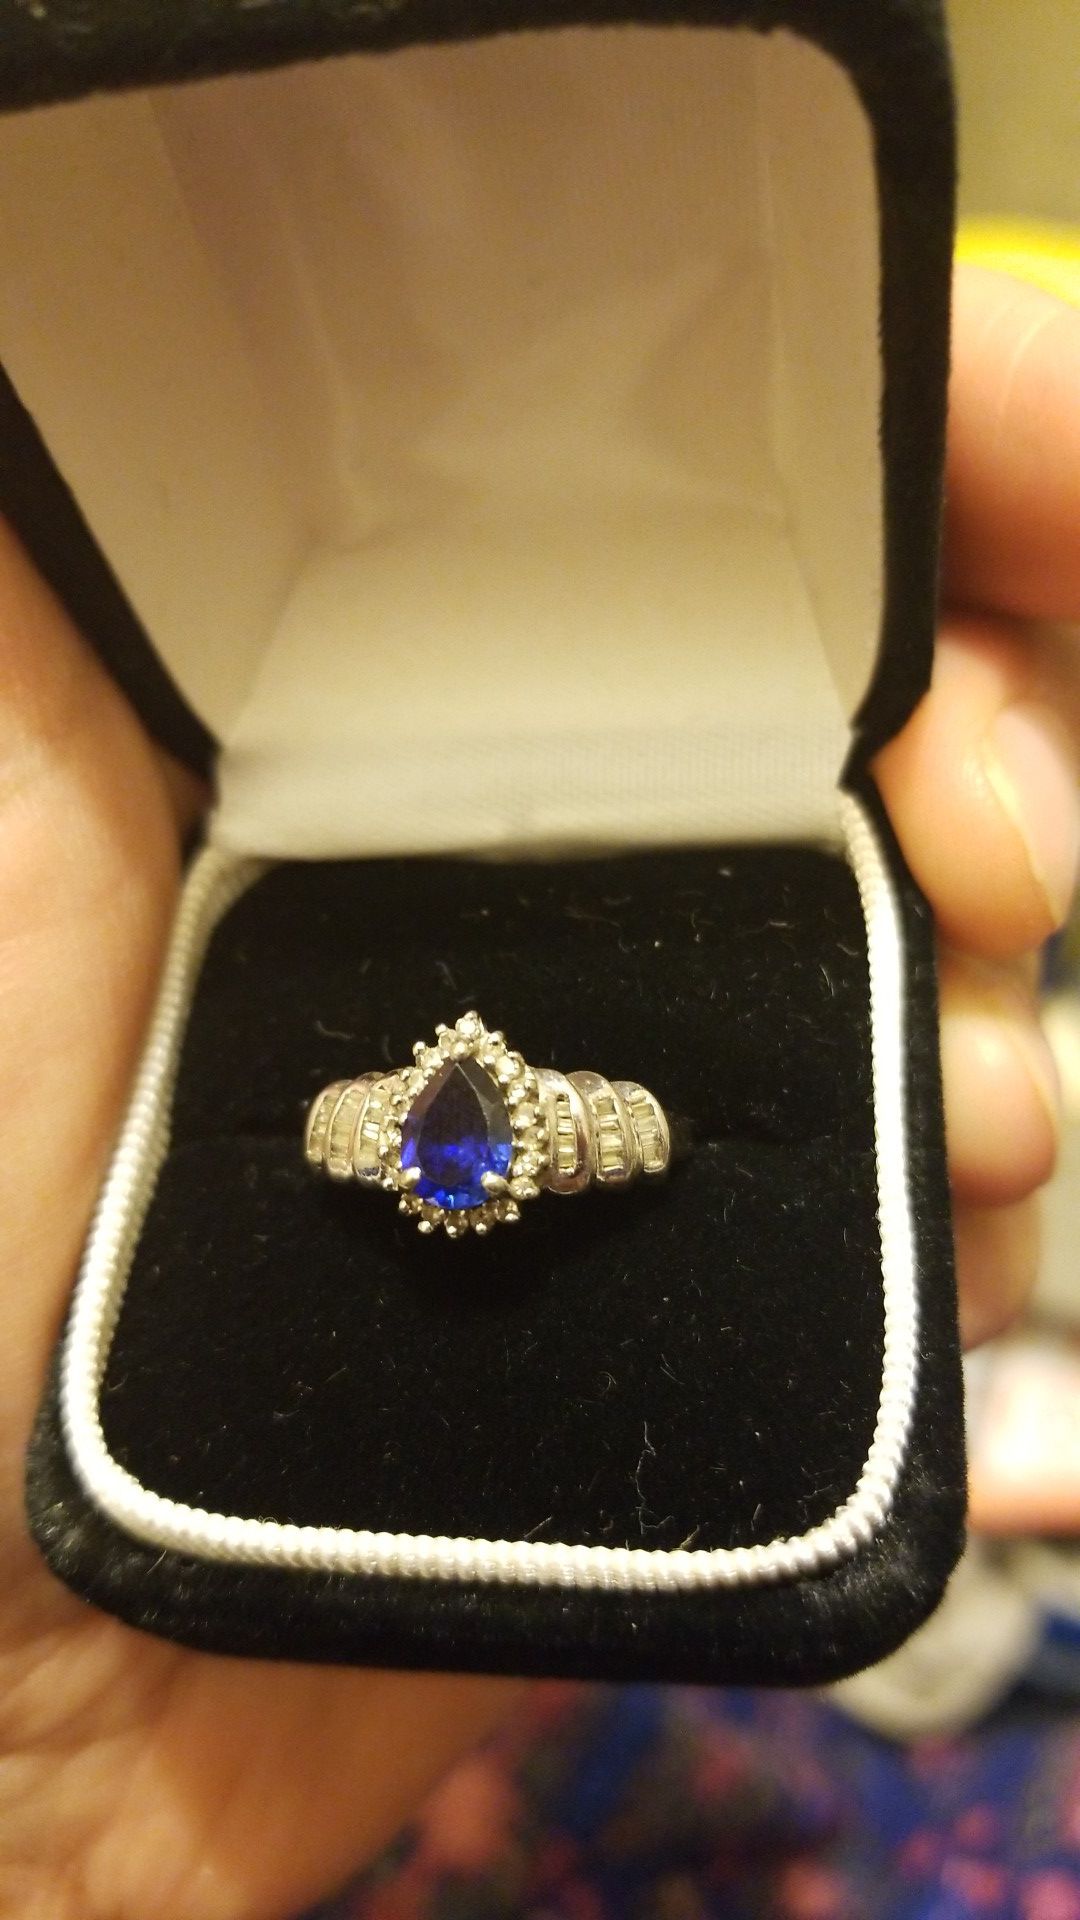 14k WHITE GOLD RING WITH SAPPHIRE